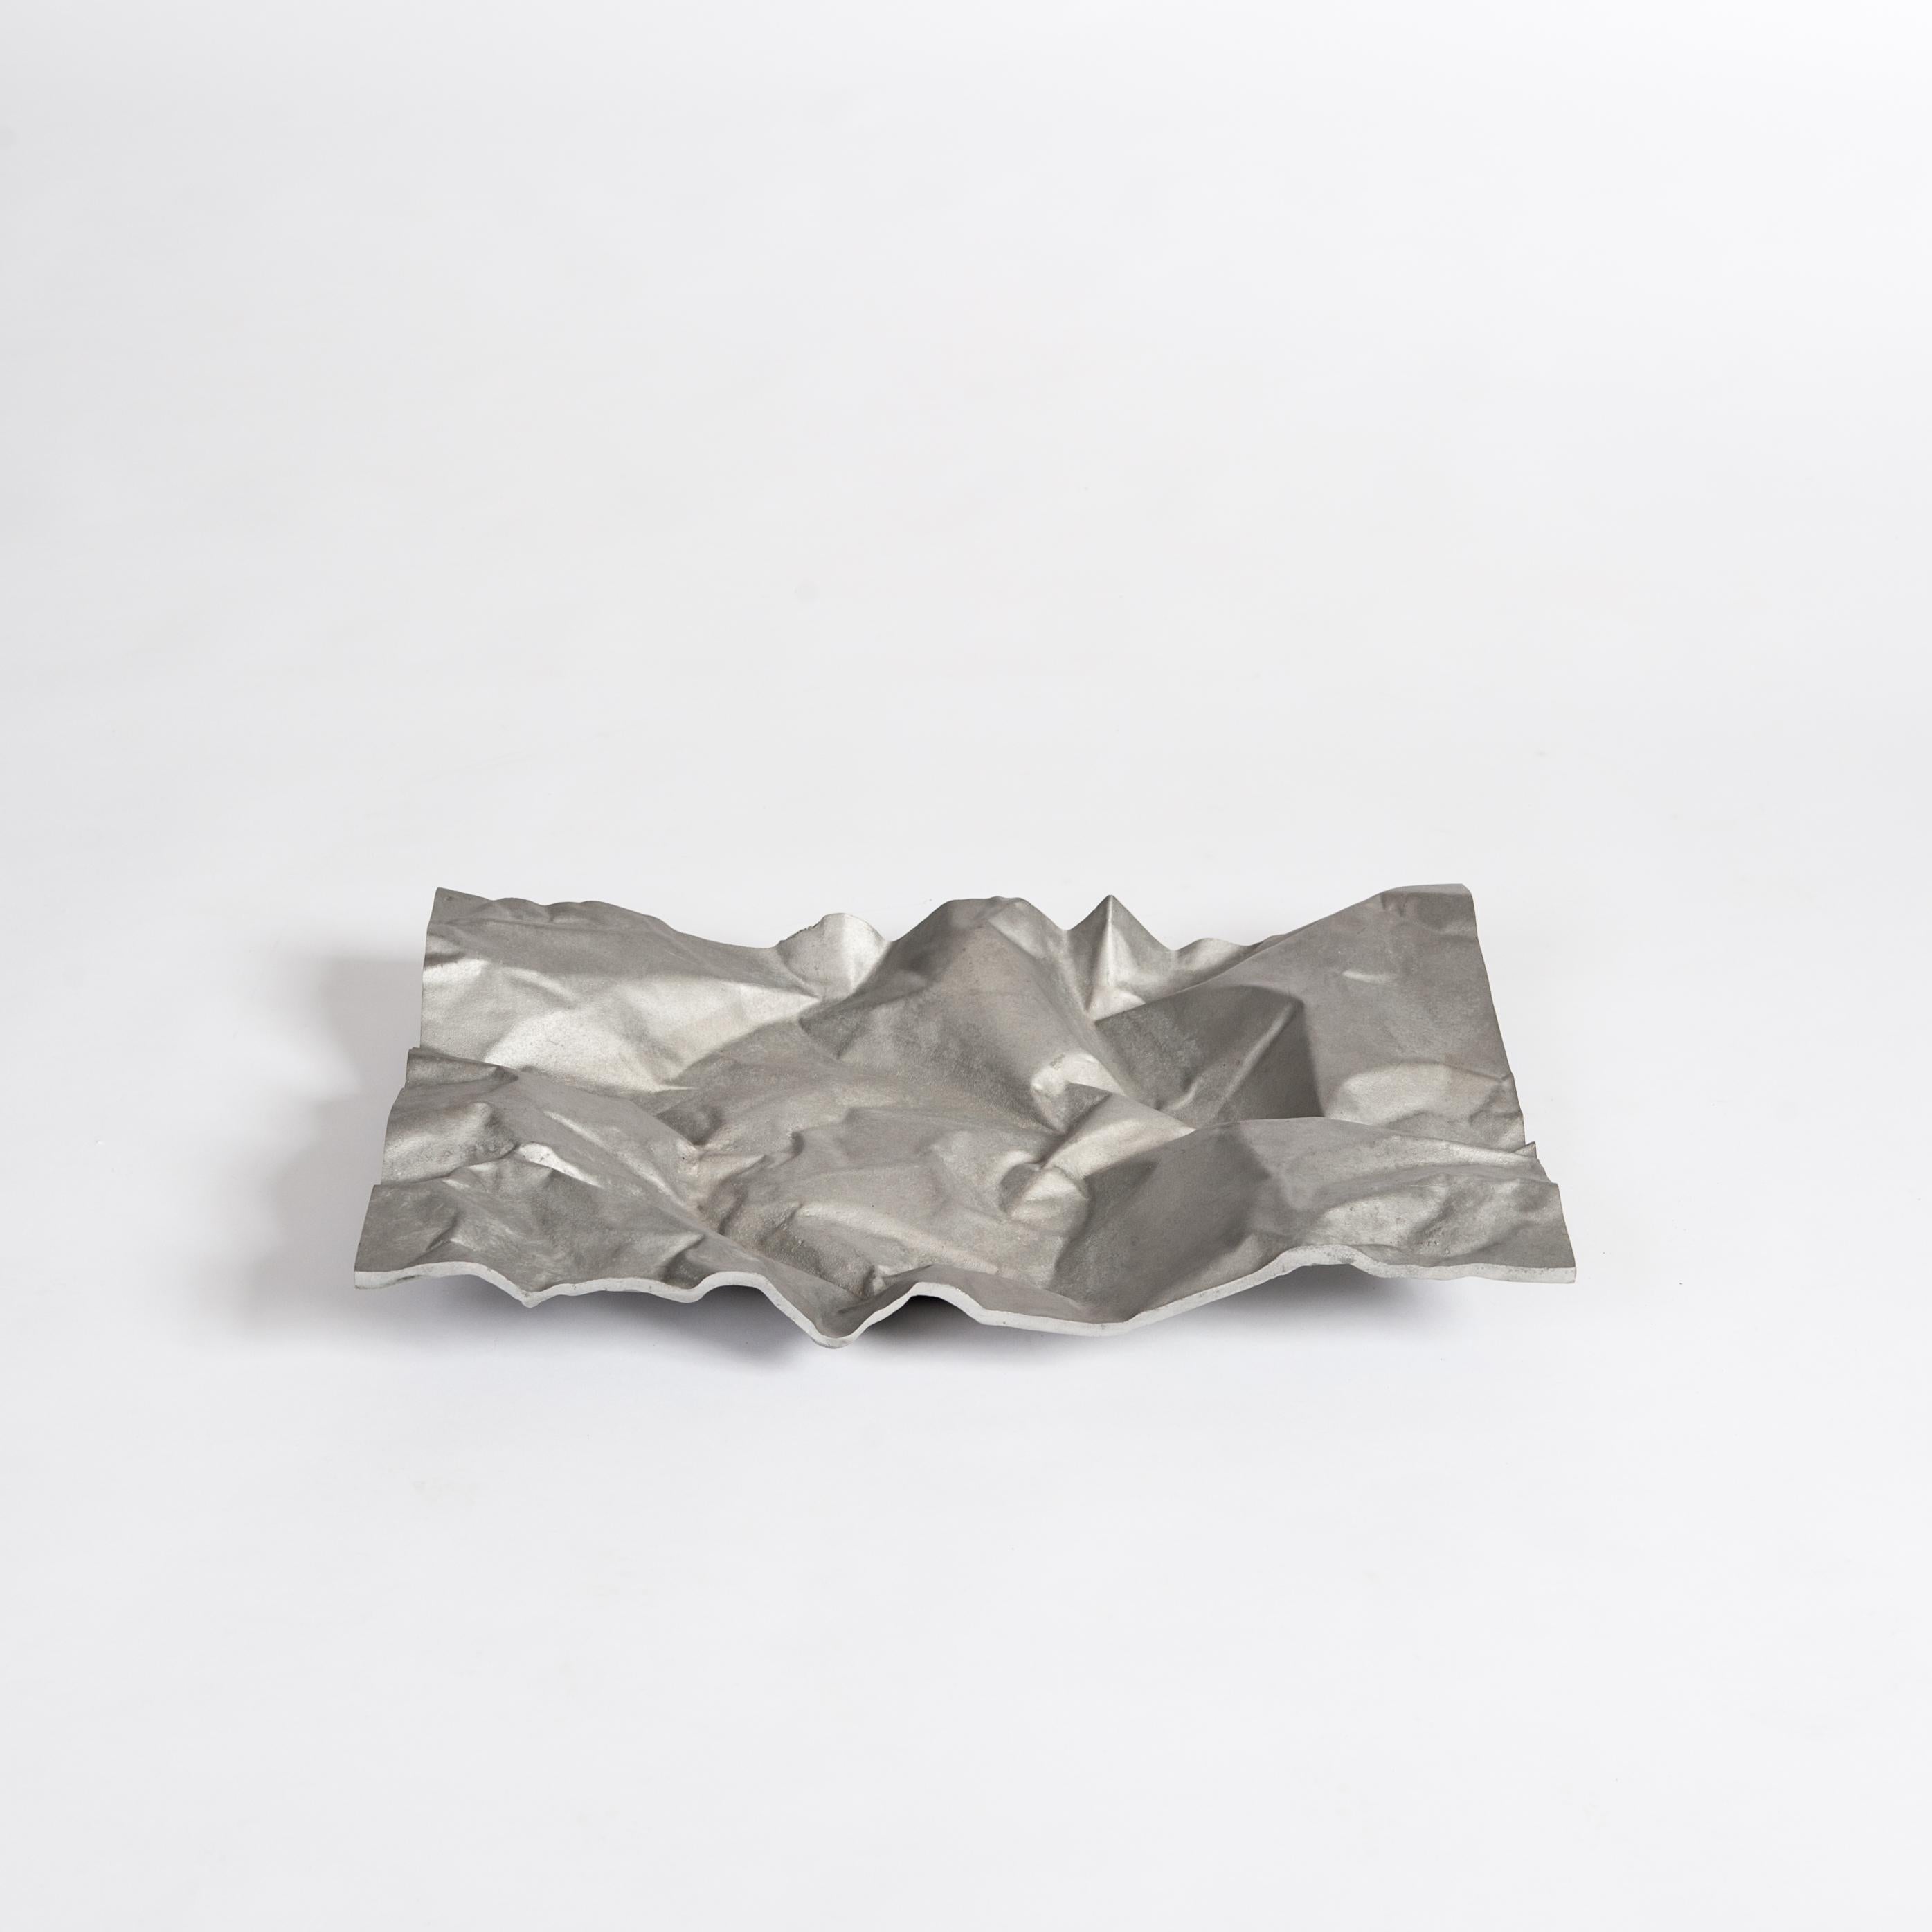 Italian midcentury abstract-geometric silvergrey alumnium bowl designed like a wrinkeled paper, signed NP2 at the bottom Nerone and Patuzzi (sculptor/architect Nerone Ceccarelli & Giancarlo Patuzzi)
The surface of the bowl has a slightly